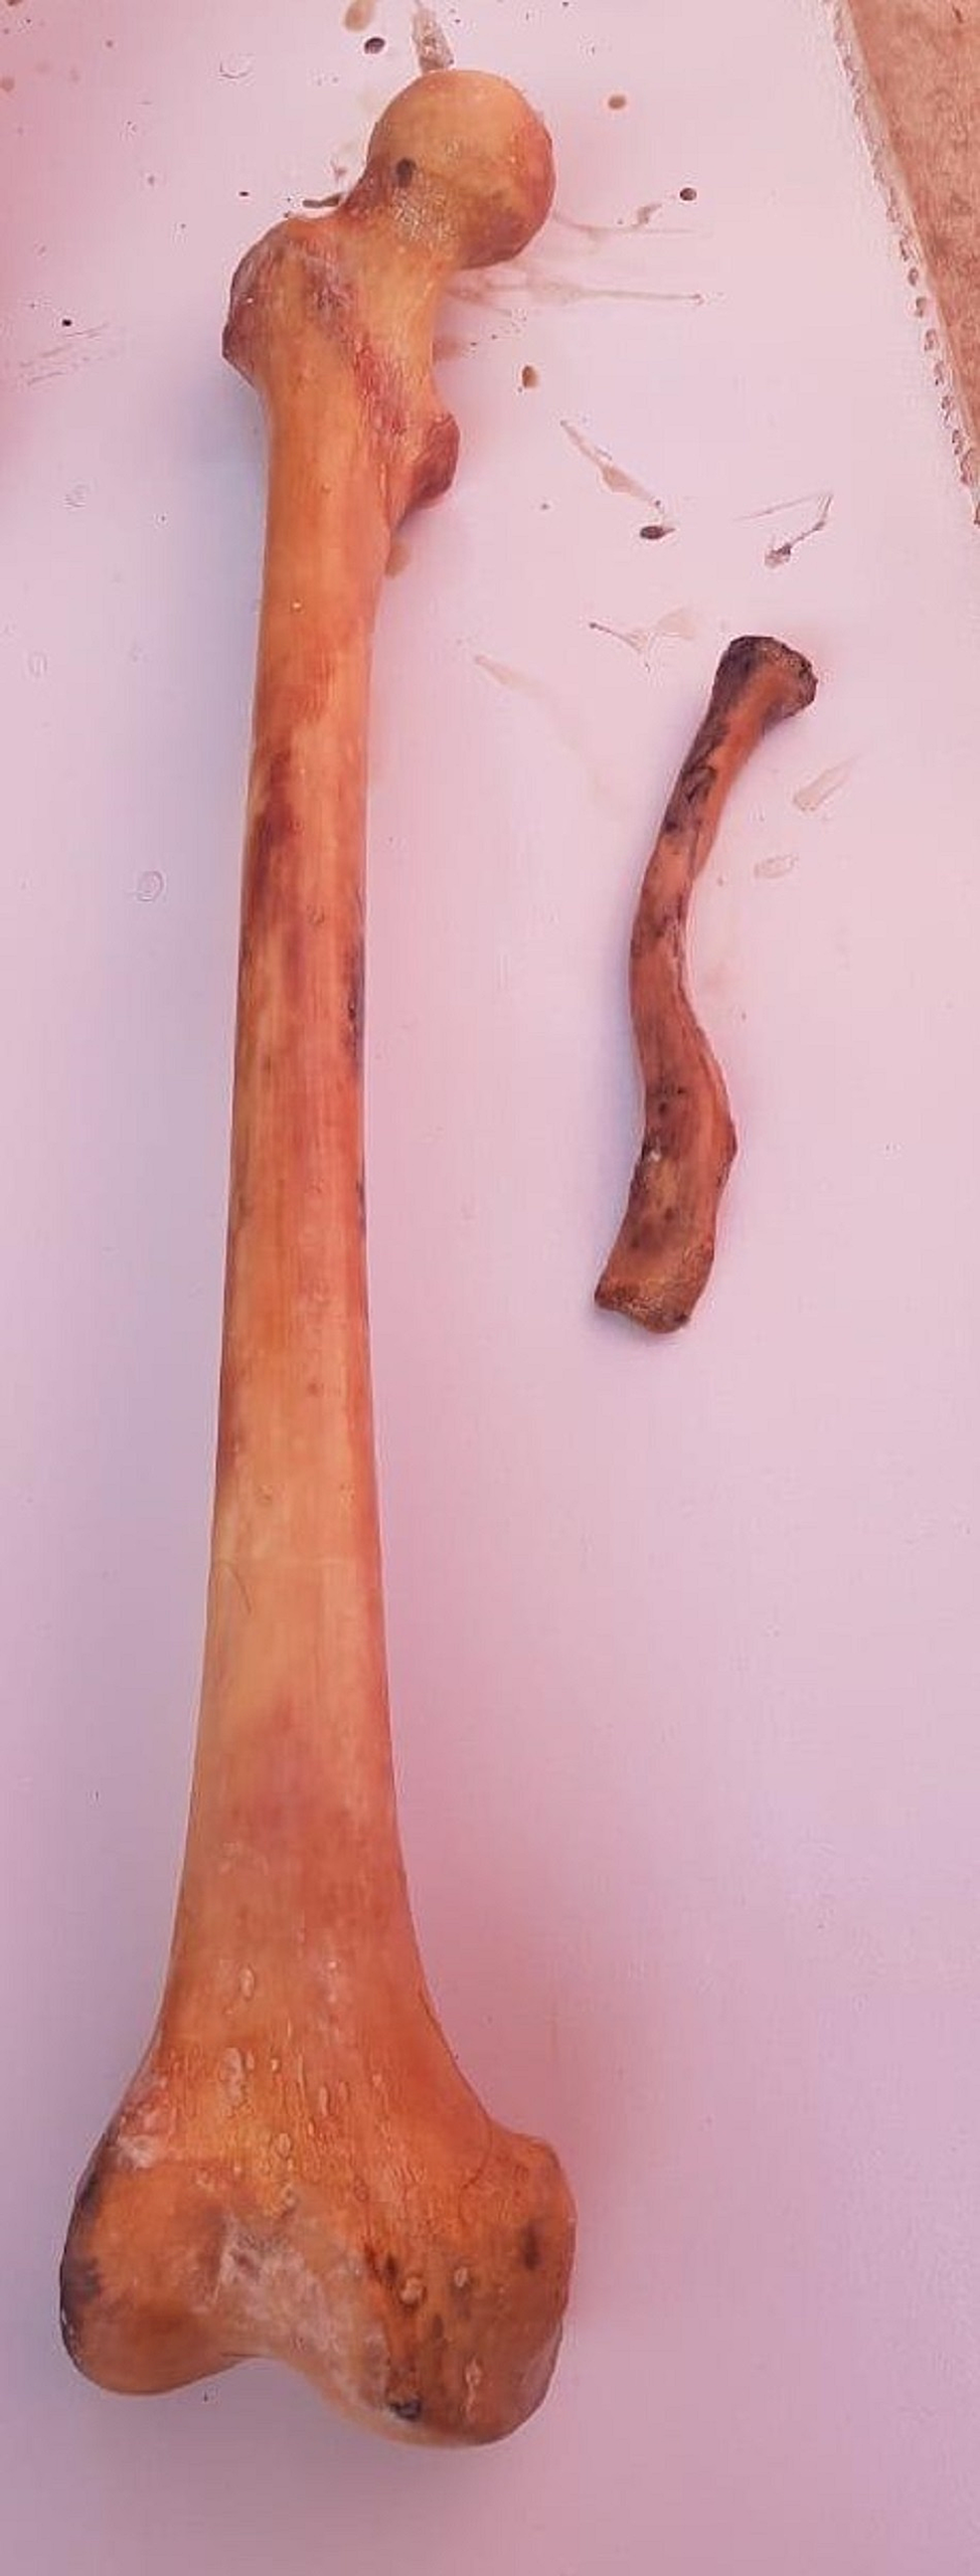 Right-femur-(left)-and-left-clavicle-(right).